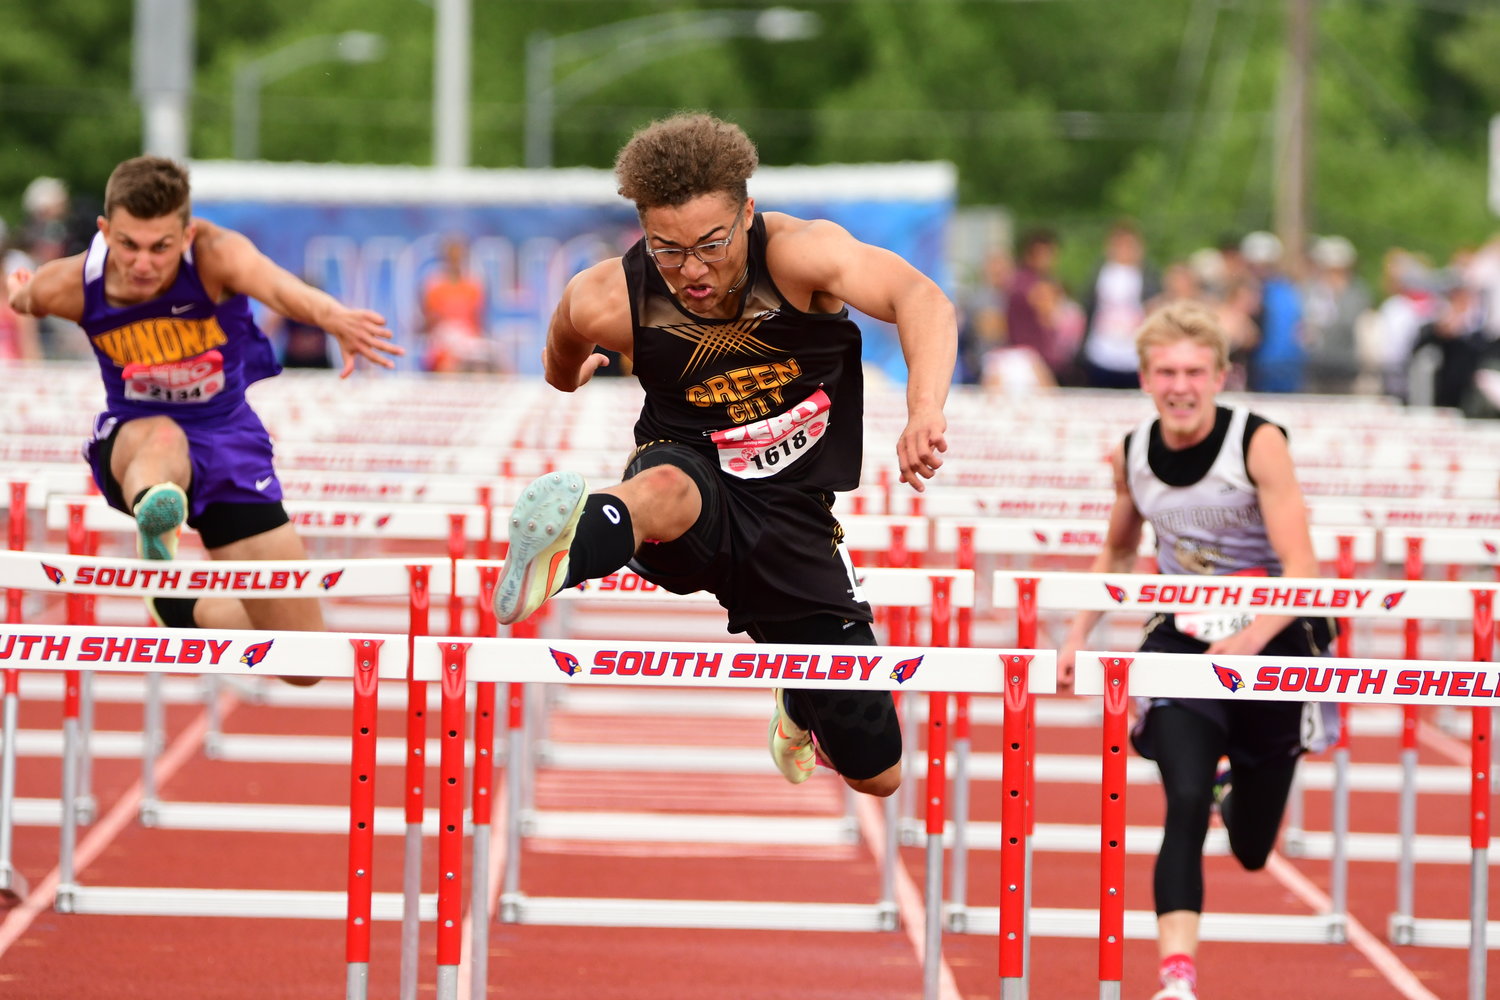 Green City's Asher Buggs-Tipton leads the pack during the Class 1 boys 110m hurdles race at the 2022 MSHSAA State Track Championships.